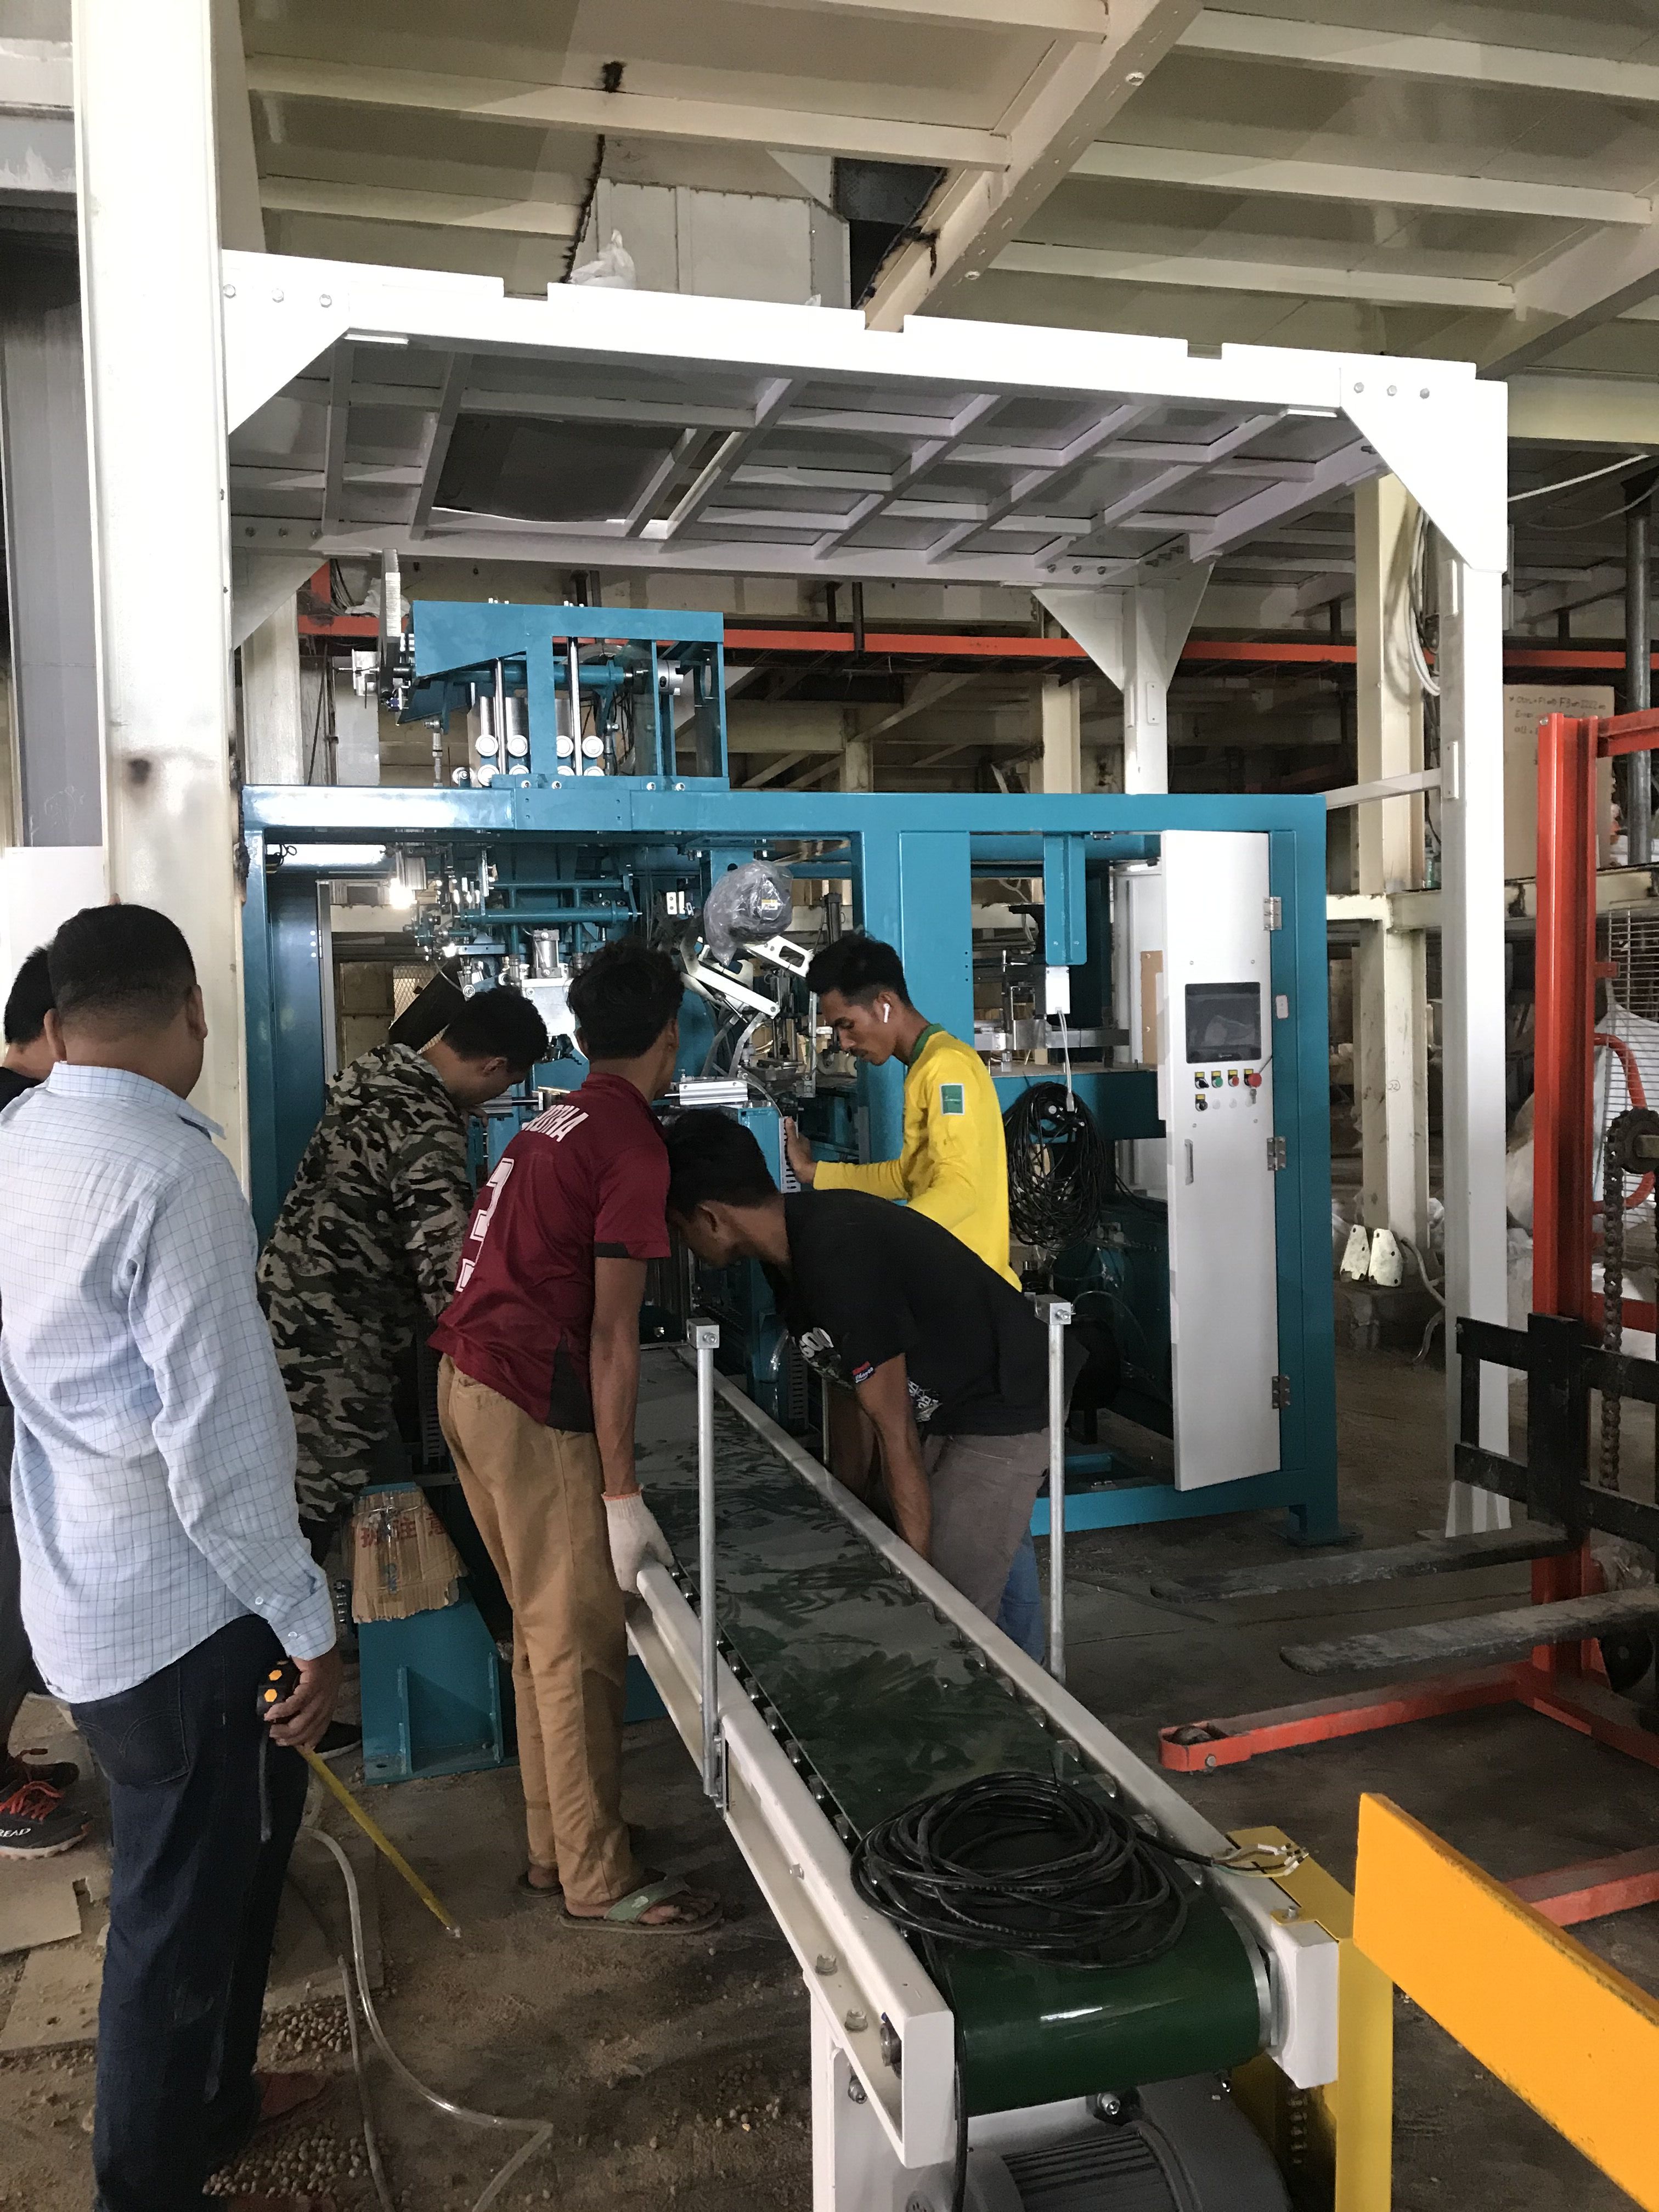 Fully Automatic Packing & Palletizing Line Fully Automatic Packing Palletizing Line Fully Automatic Packing Line Fully Automatic Bagging Line Fully Automatic filling and packaging line automated baggi